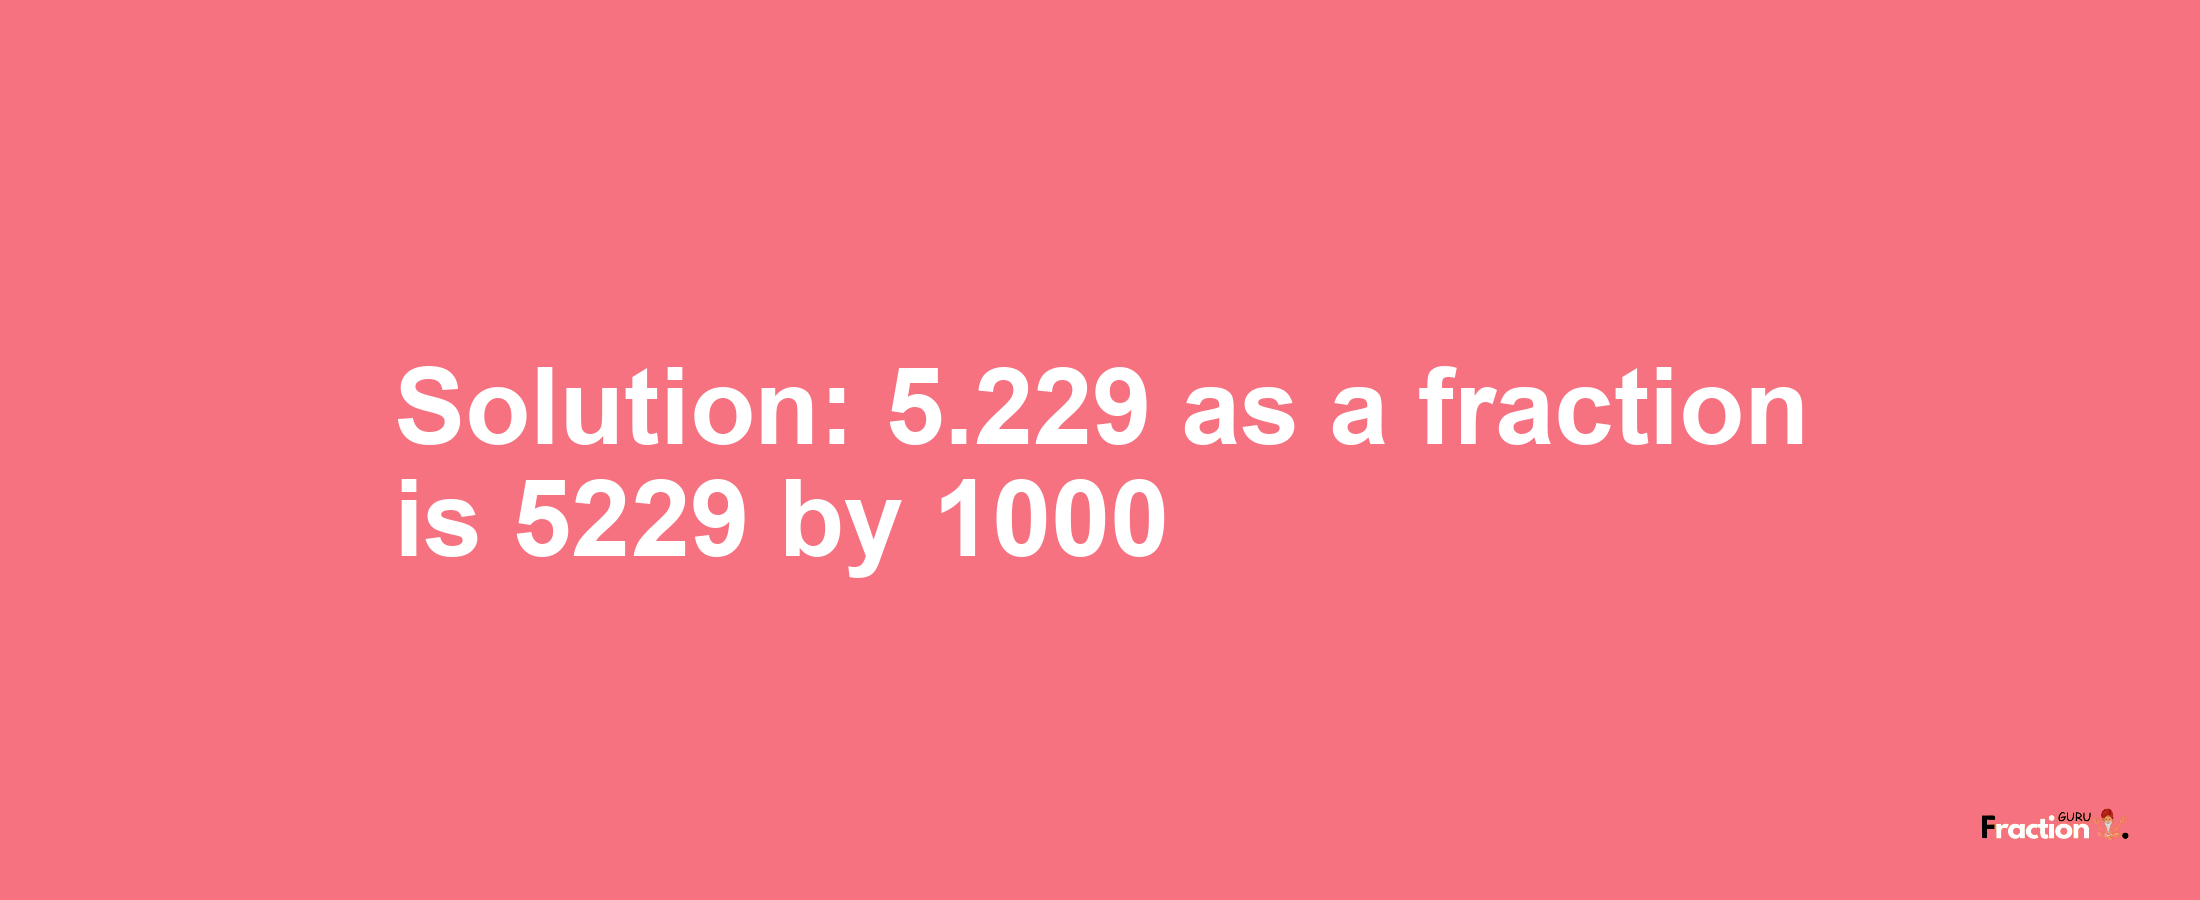 Solution:5.229 as a fraction is 5229/1000